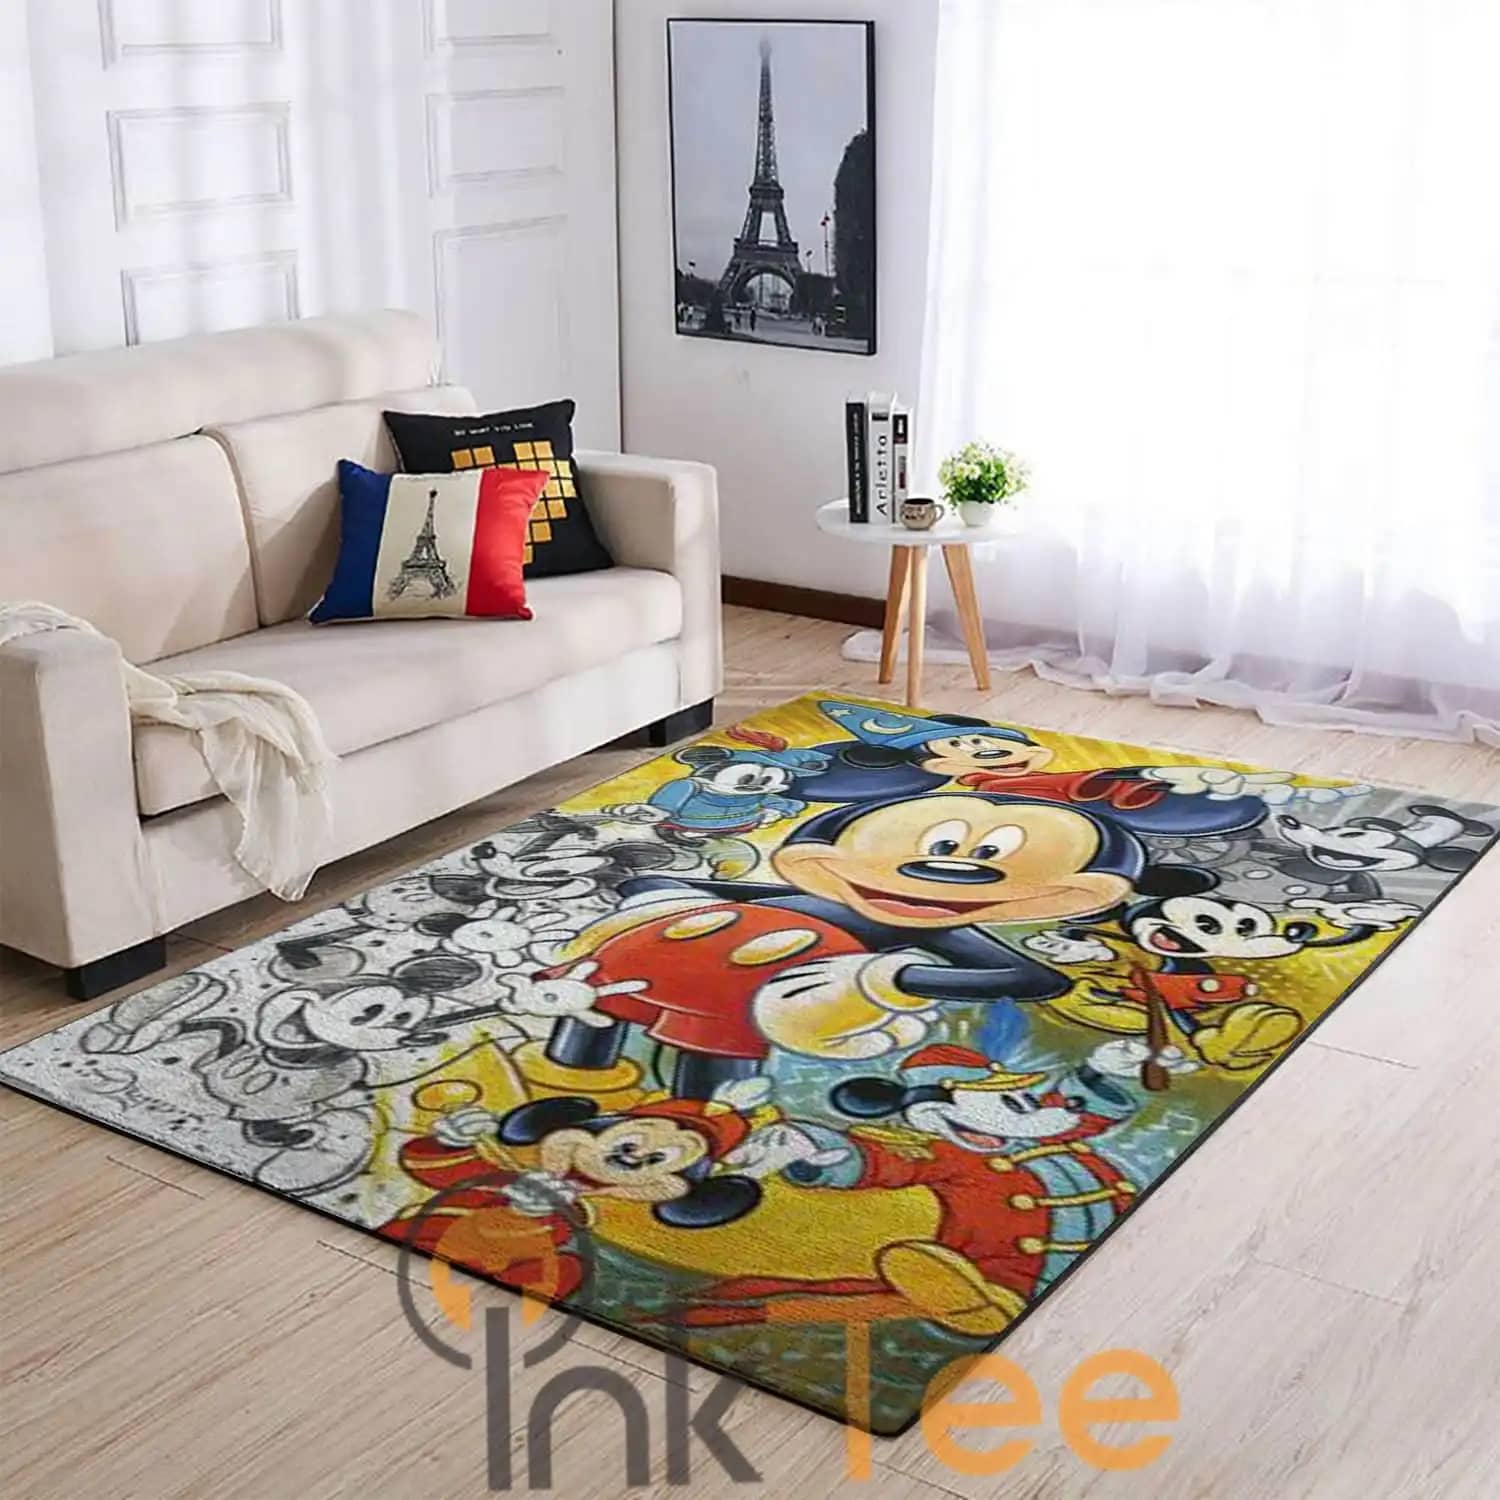 Colorful Mickey Mouse Living Room Area Amazon 4109 Rug